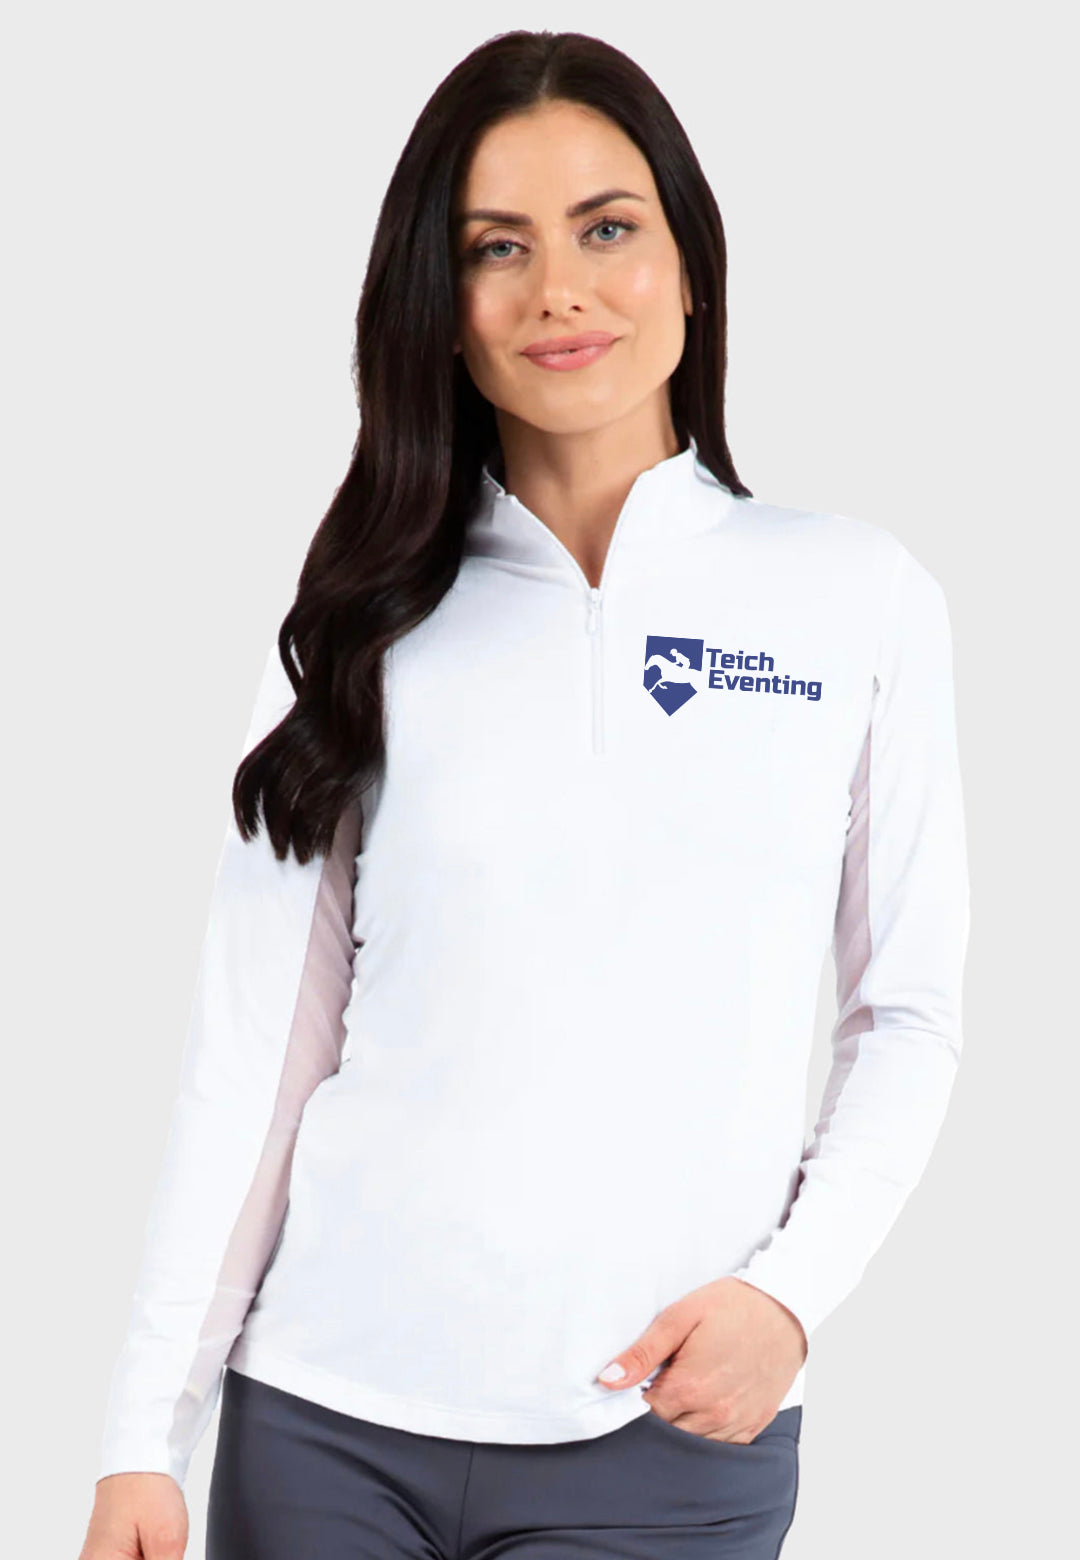 Teich Eventing IBKÜL® Long Sleeve Sun Shirt - Ladies + Youth Sizes, 2 Color Options